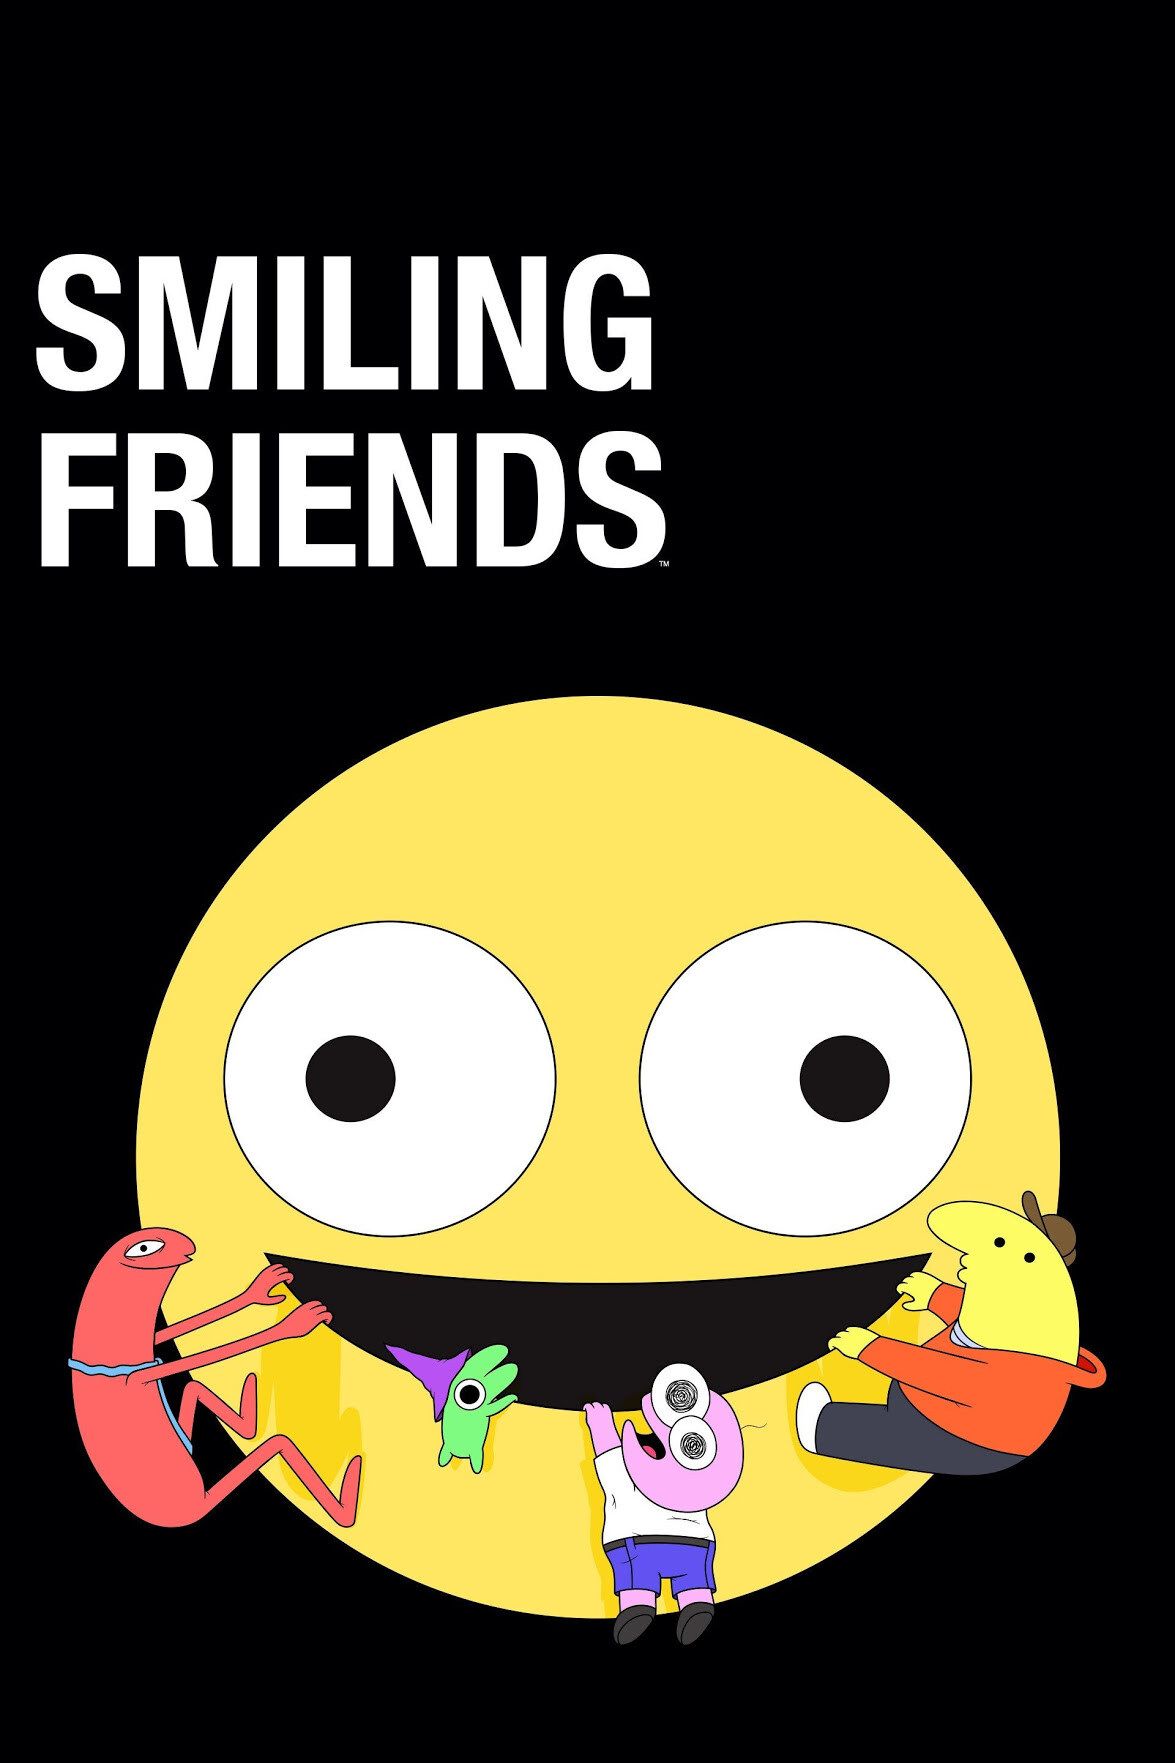 Smiling Friends TV Show Poster